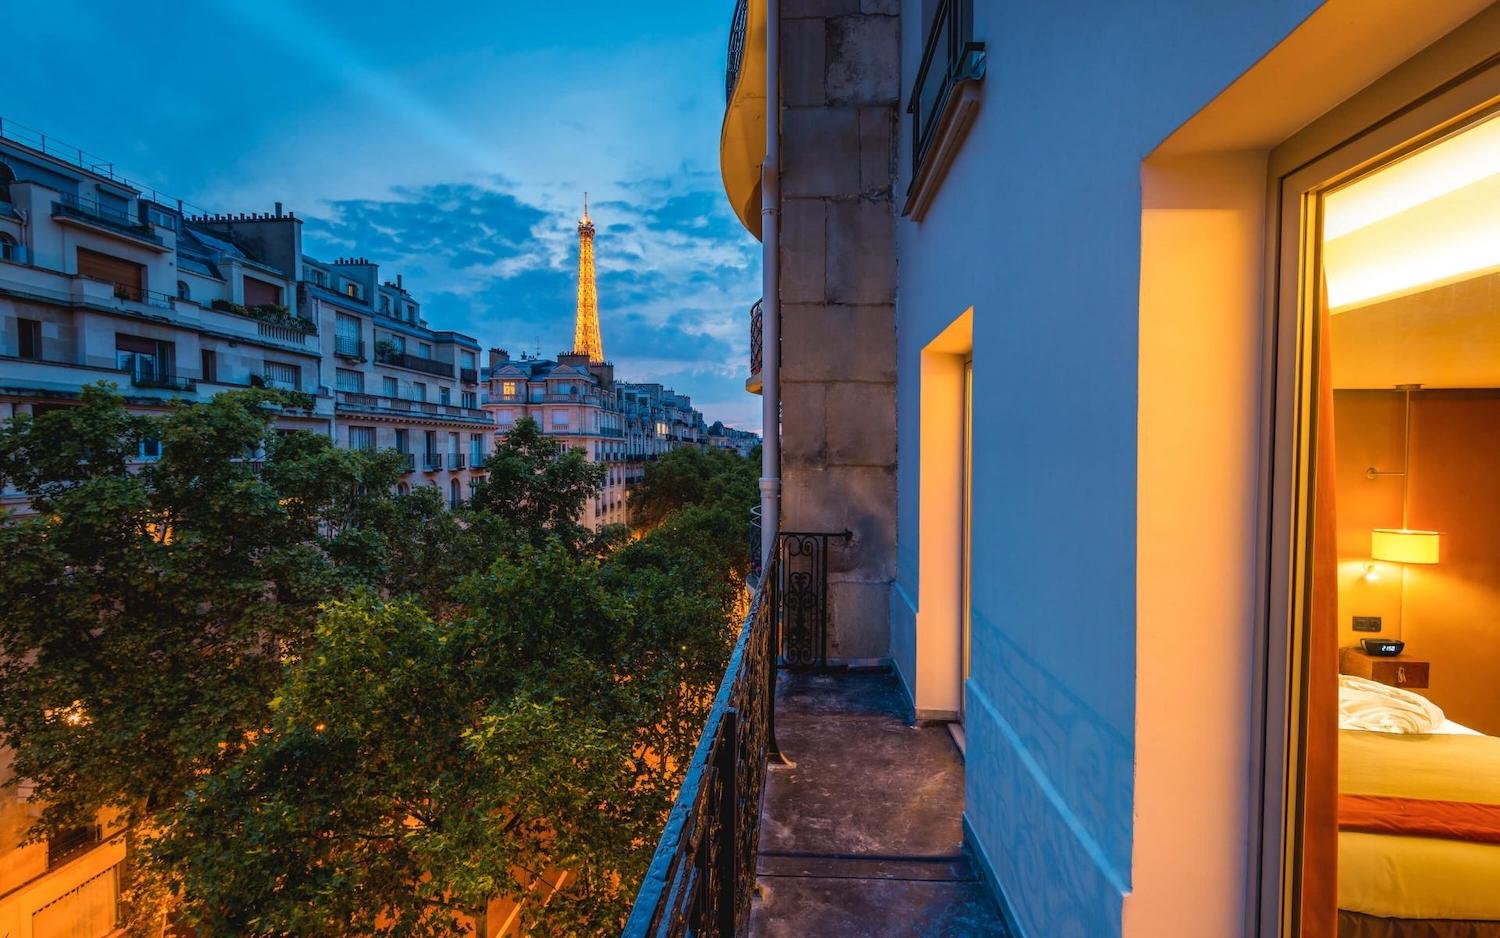 Parisian balcony with Eiffel Tower View at dusk